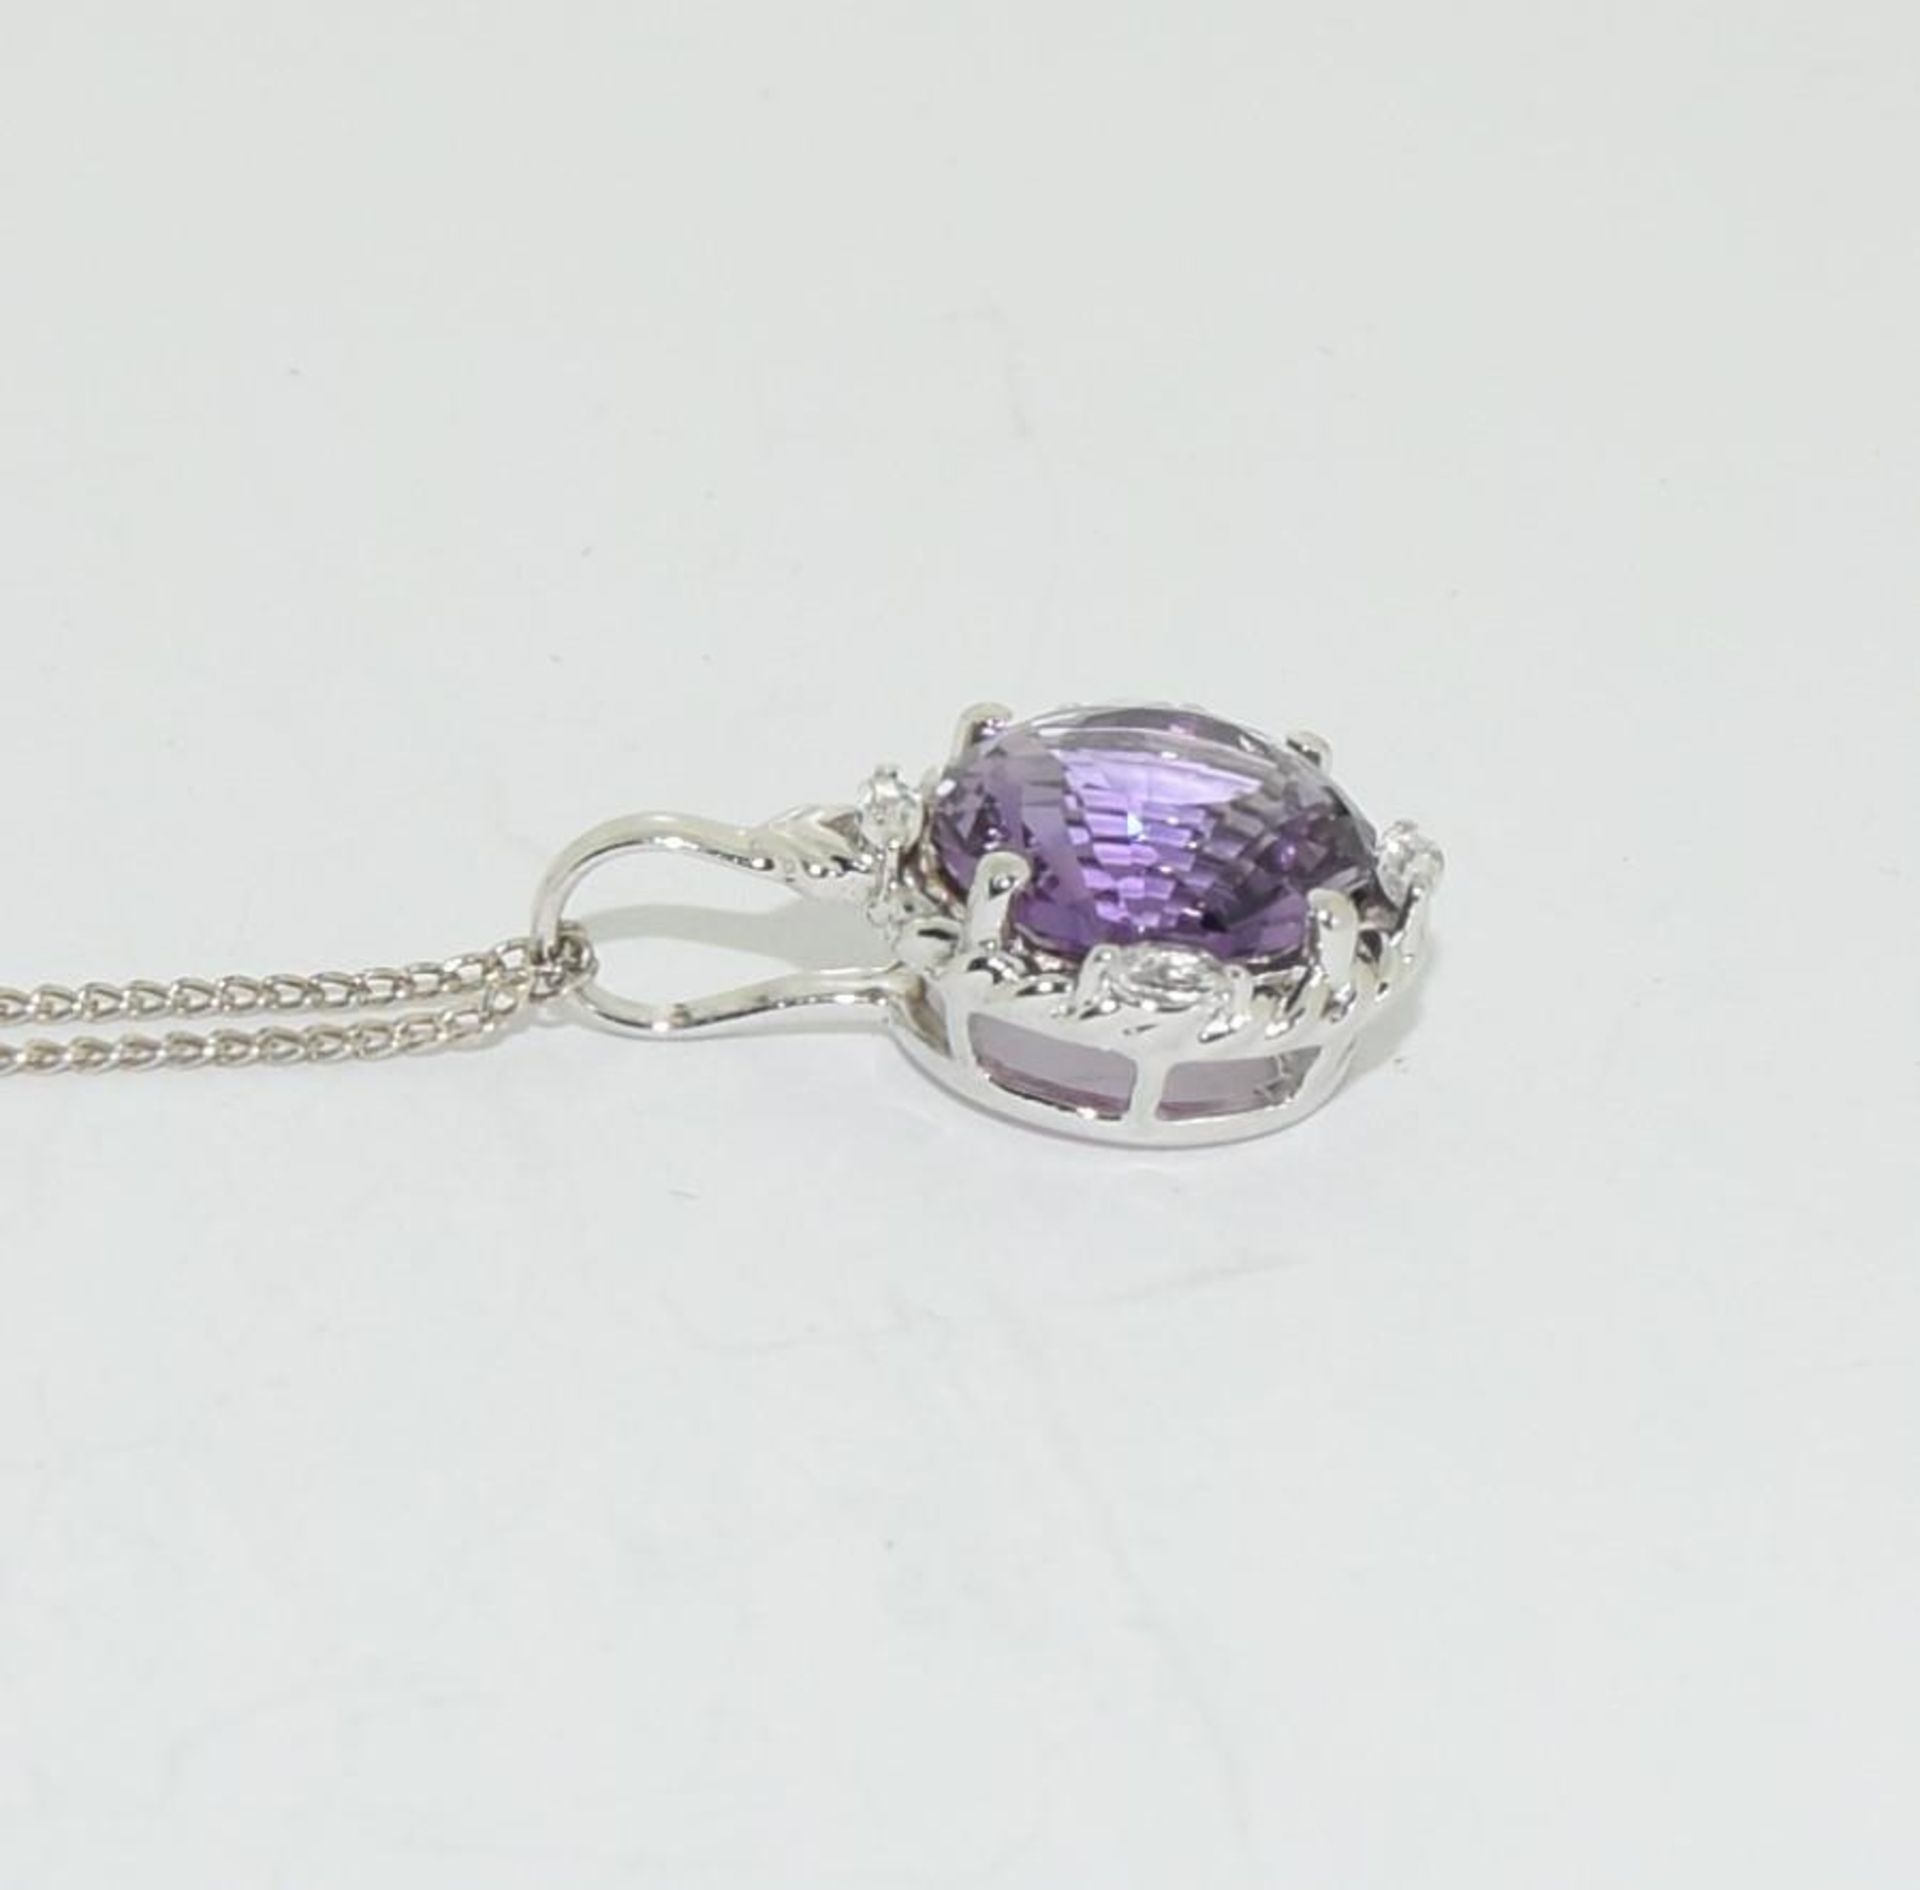 Victorian inspired amethyst 925 solitaire pendant. - Image 2 of 3